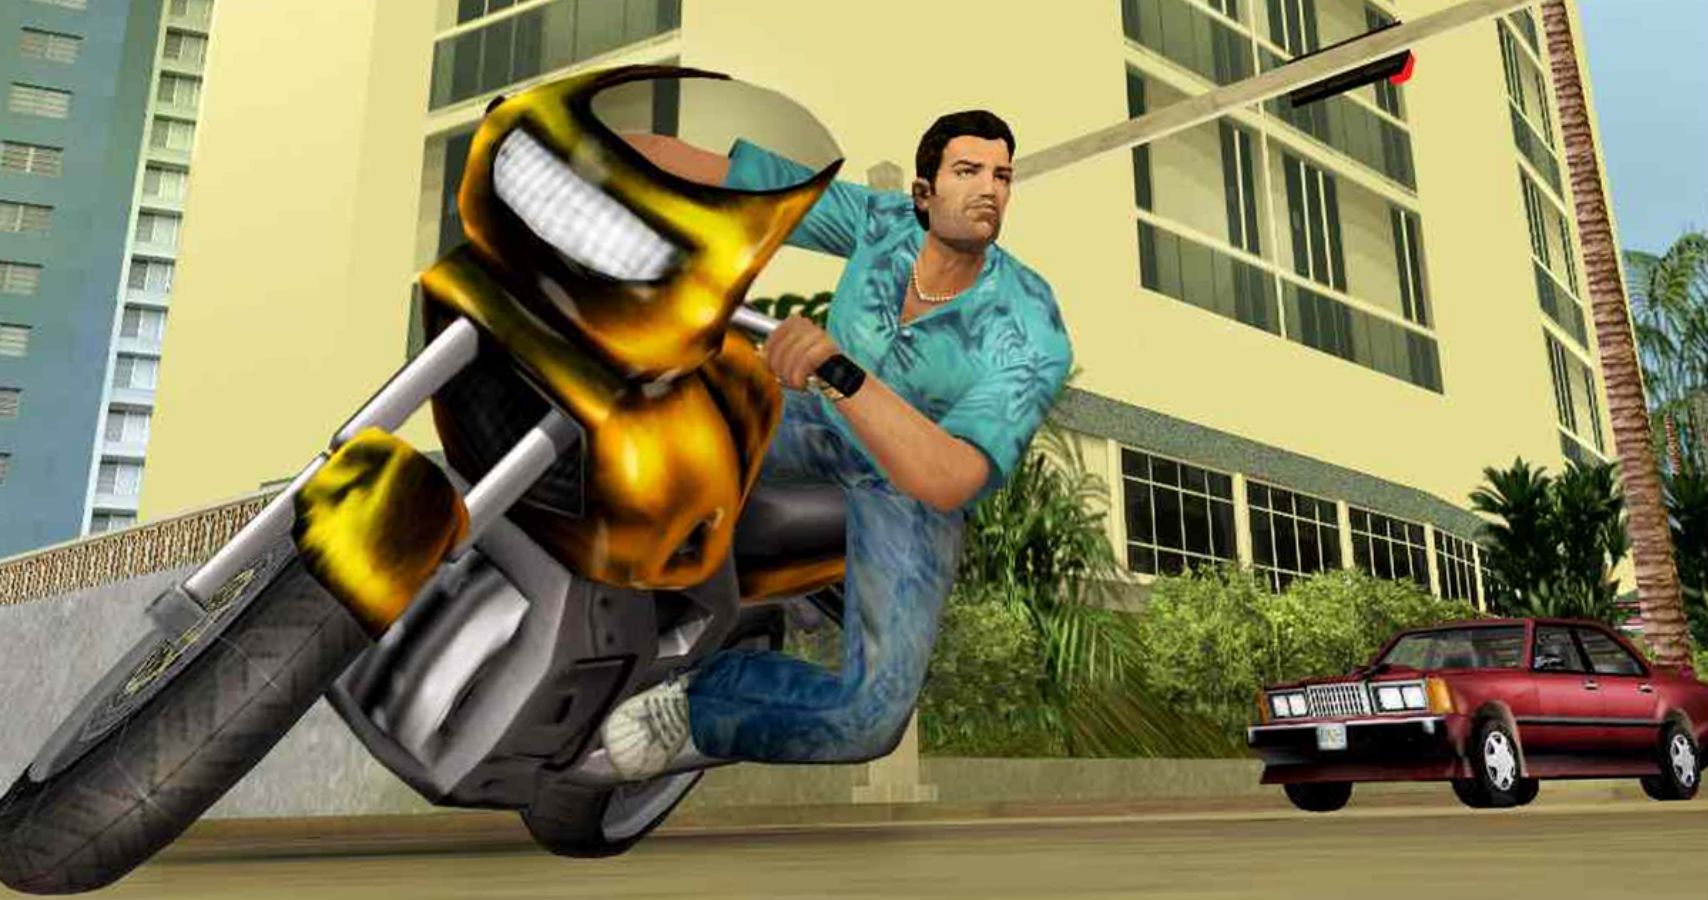 GTA 5 Might Hold All The Records, But Vice City And San Andreas Will